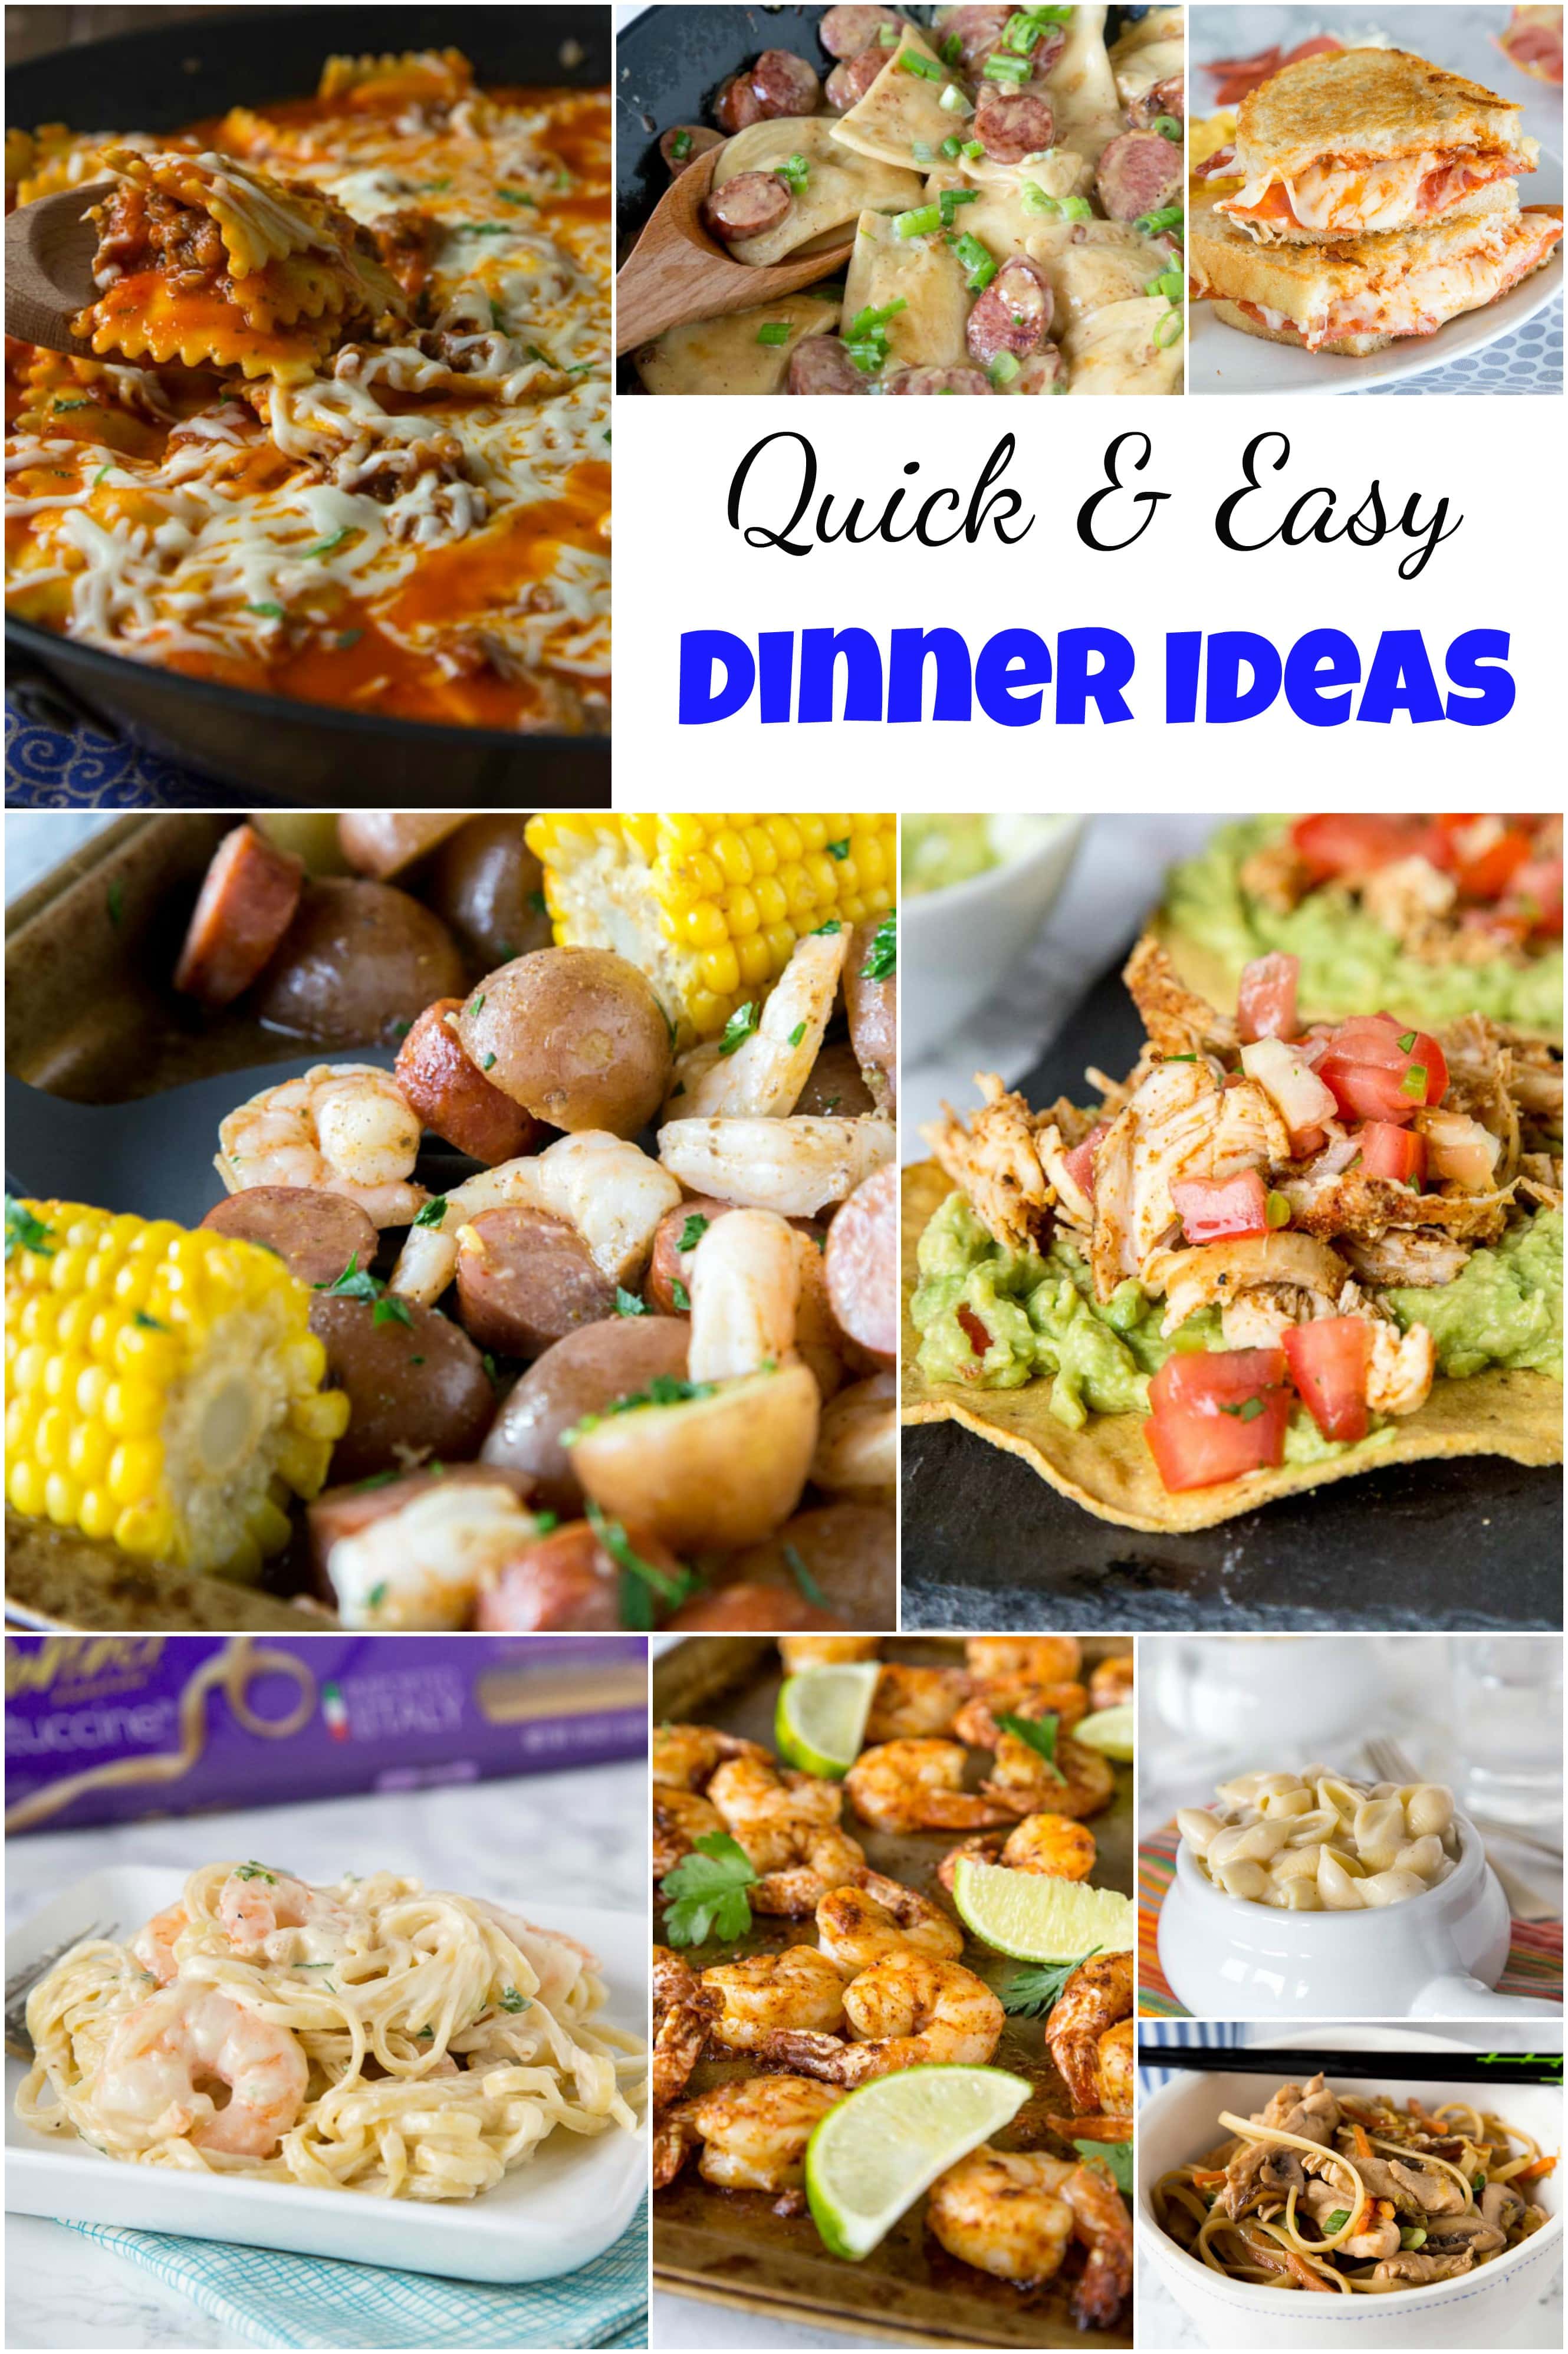 Quick and Easy Dinner Ideas - Get dinner on the table quickly with these dinner recipe ideas. Great for busy weeknights when you only have a few minutes to prep and get dinner ready! #dinnerideas #dinner #quickandeasy #cooking #food #recipe